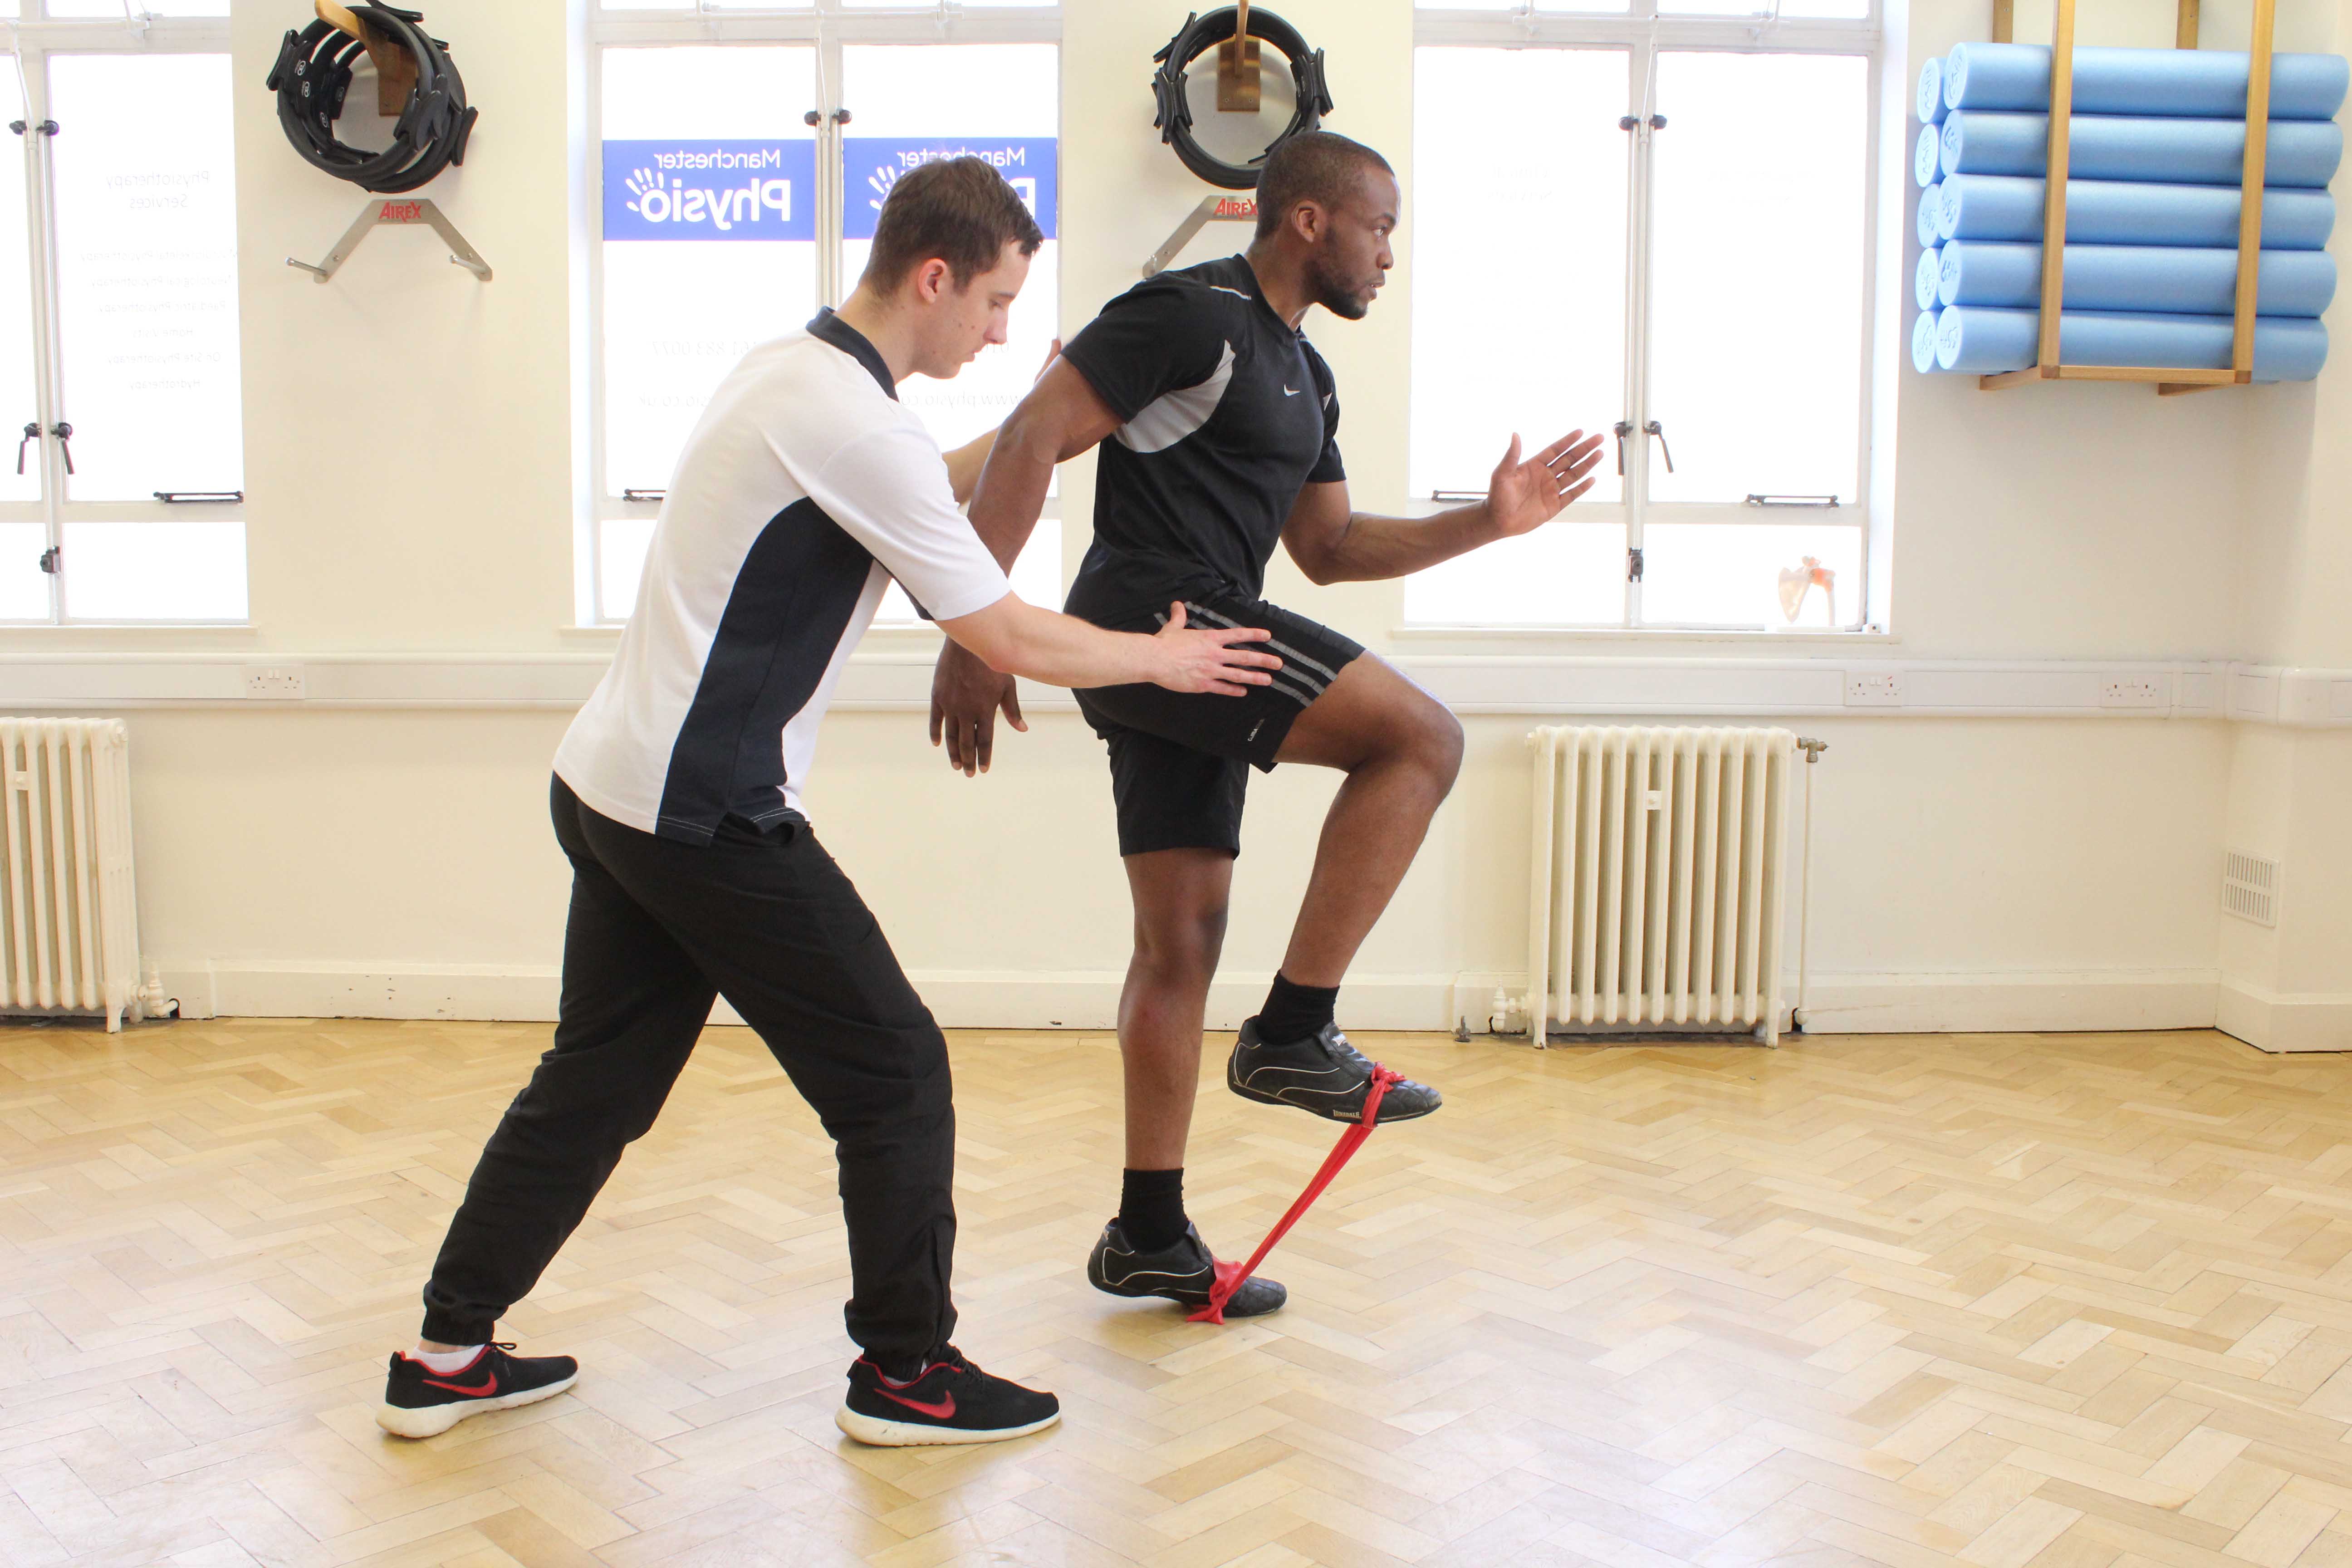 Sport rehabilitation mobility exercises using a resistance band under physiotherapy supervision